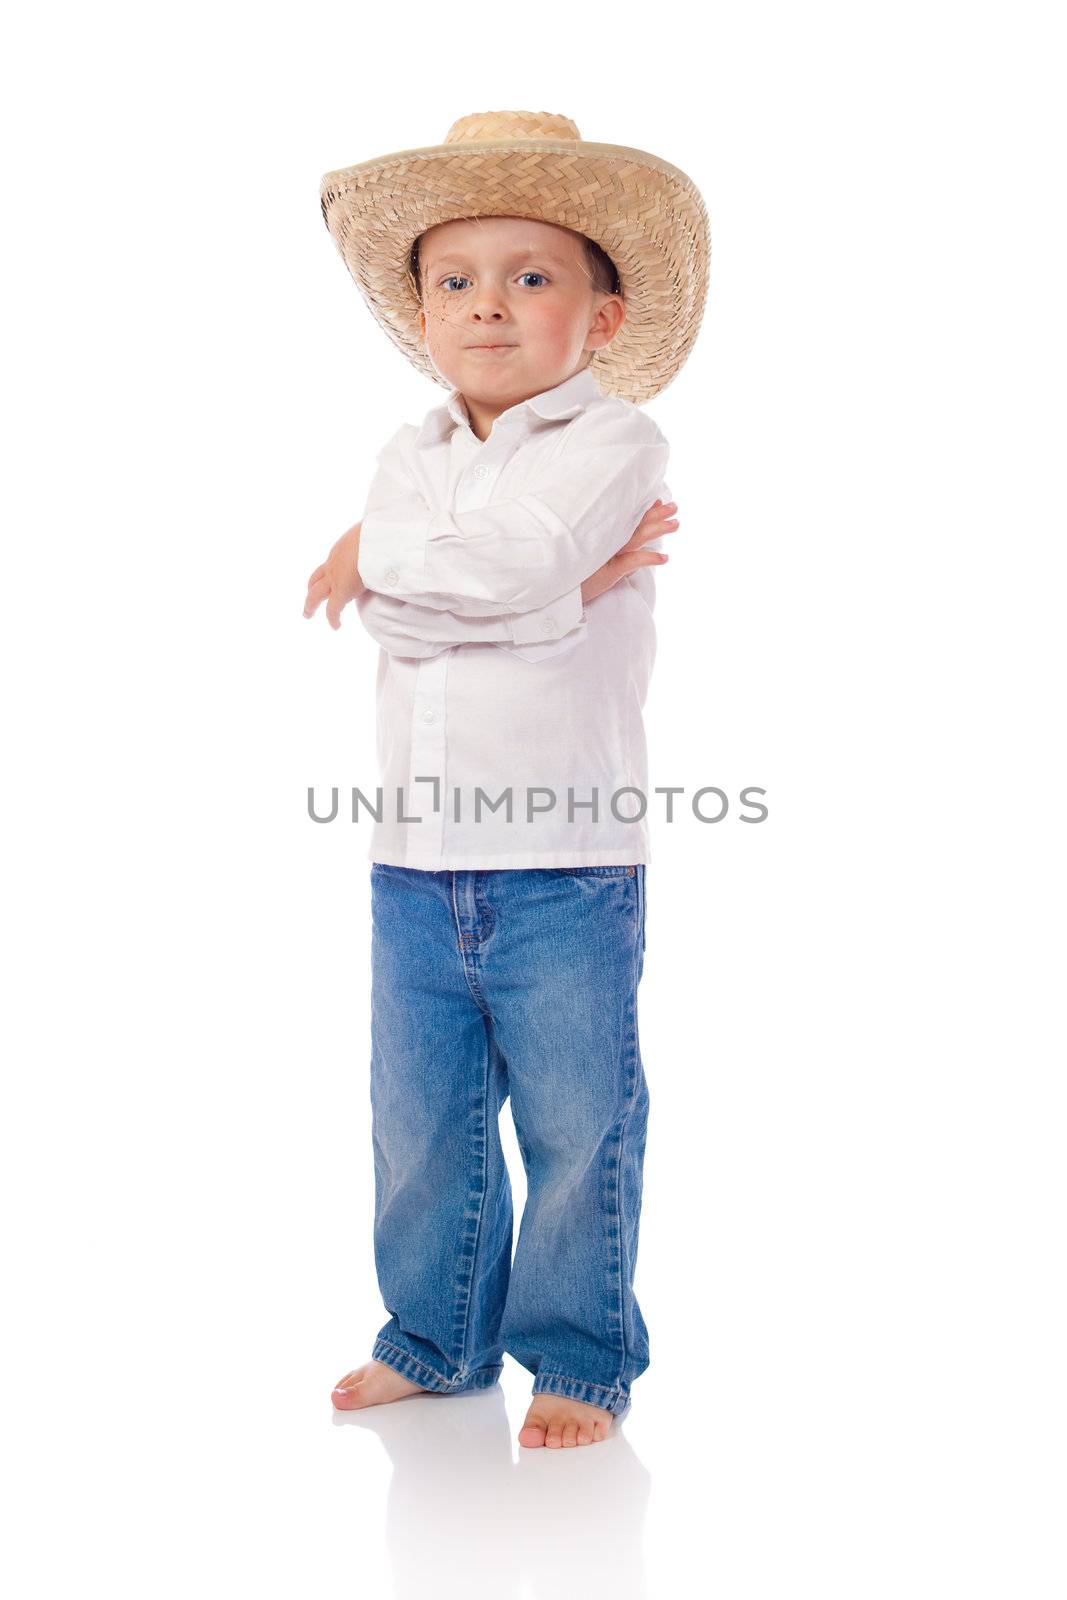 Little boy with a cowboy hat and straw in his mouth